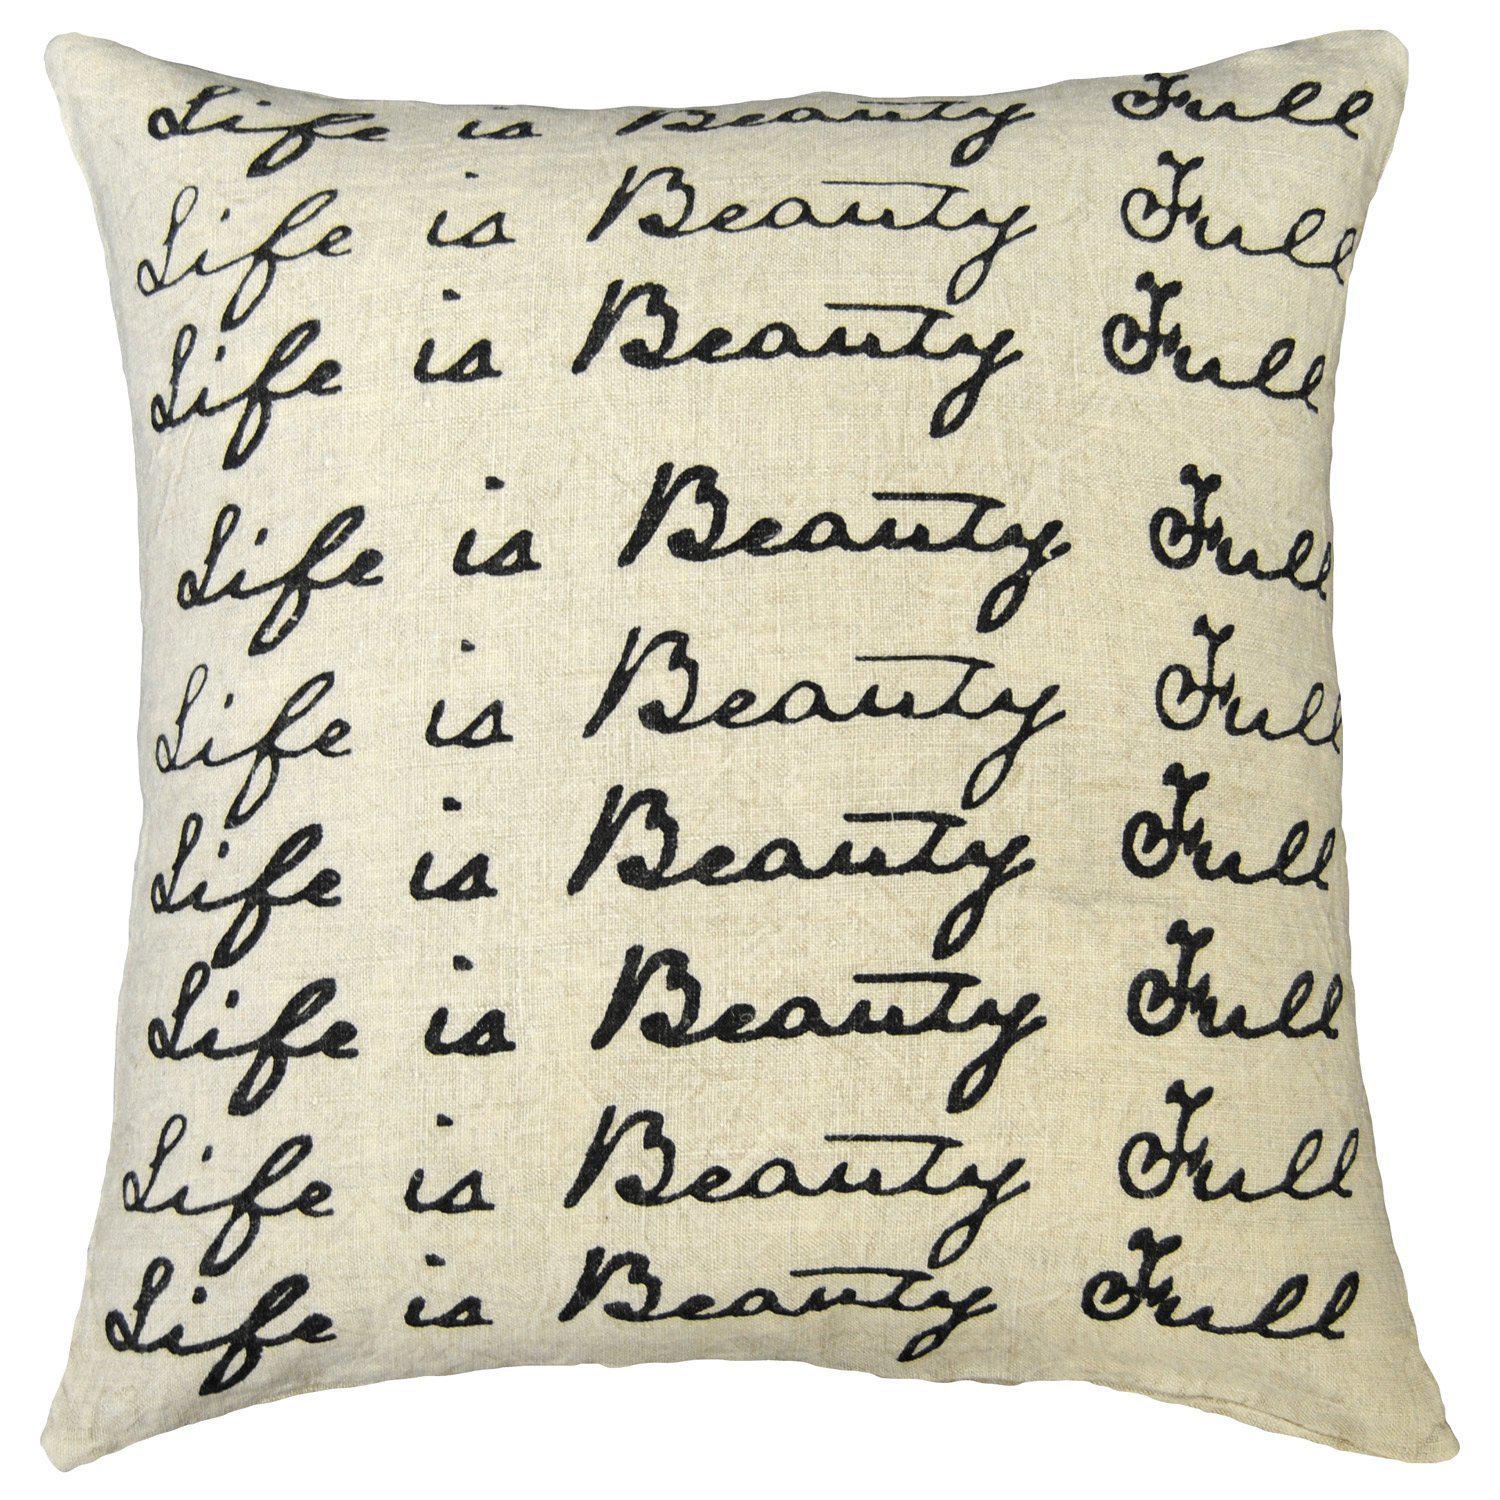 Sugarboo Designs Life Is Beauty Full Script Pillow